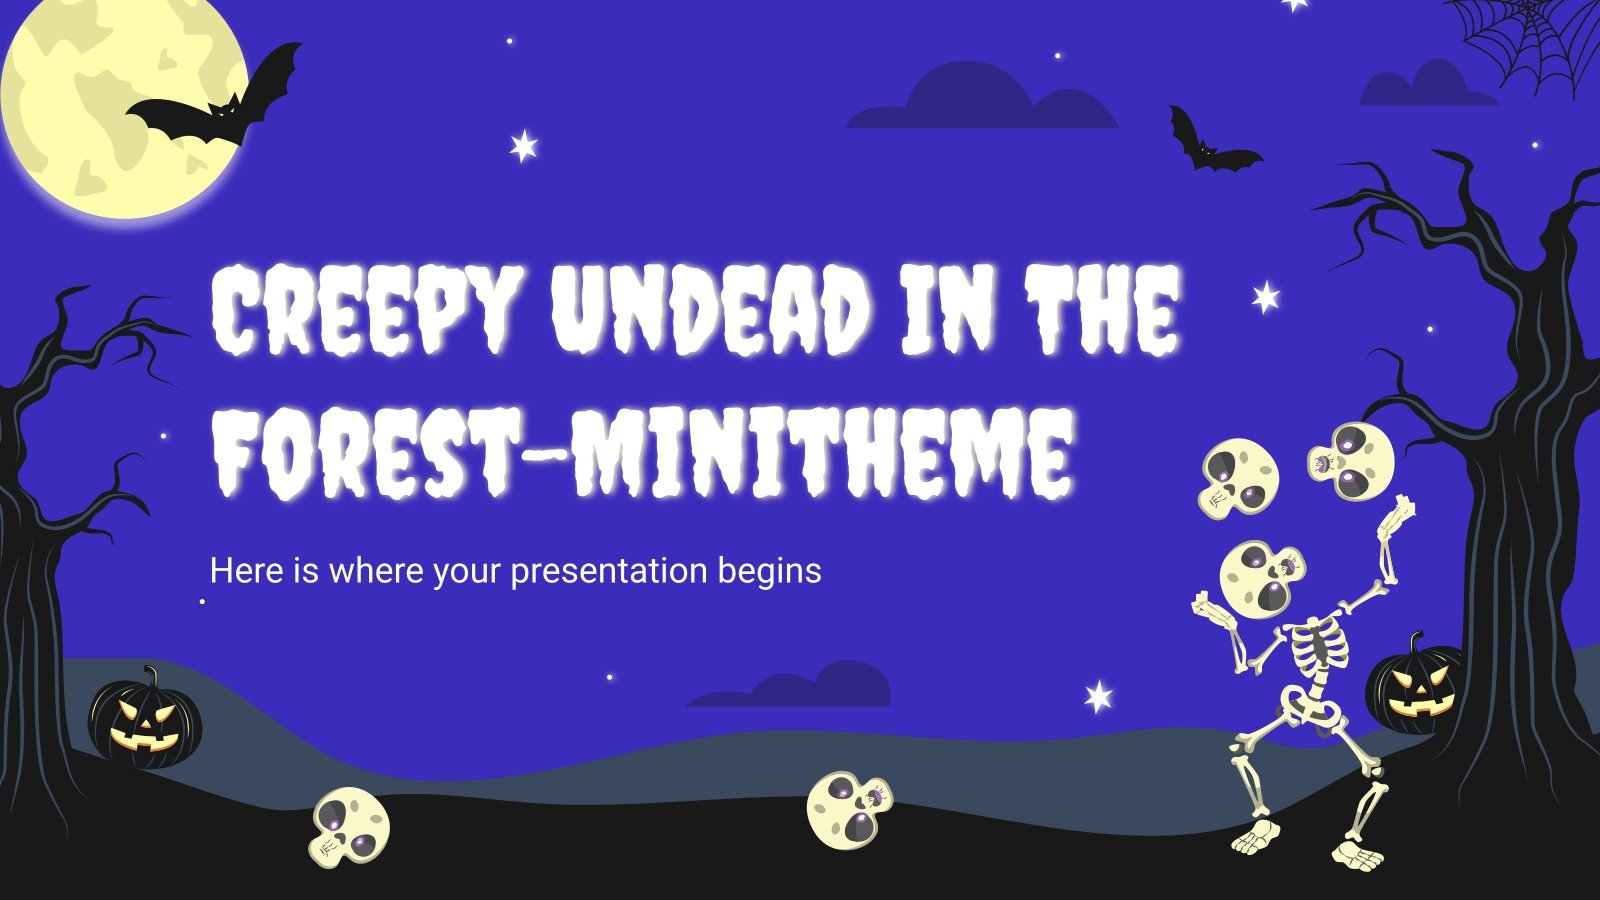 Creepy Undead in the Forest - Minitheme presentation template 